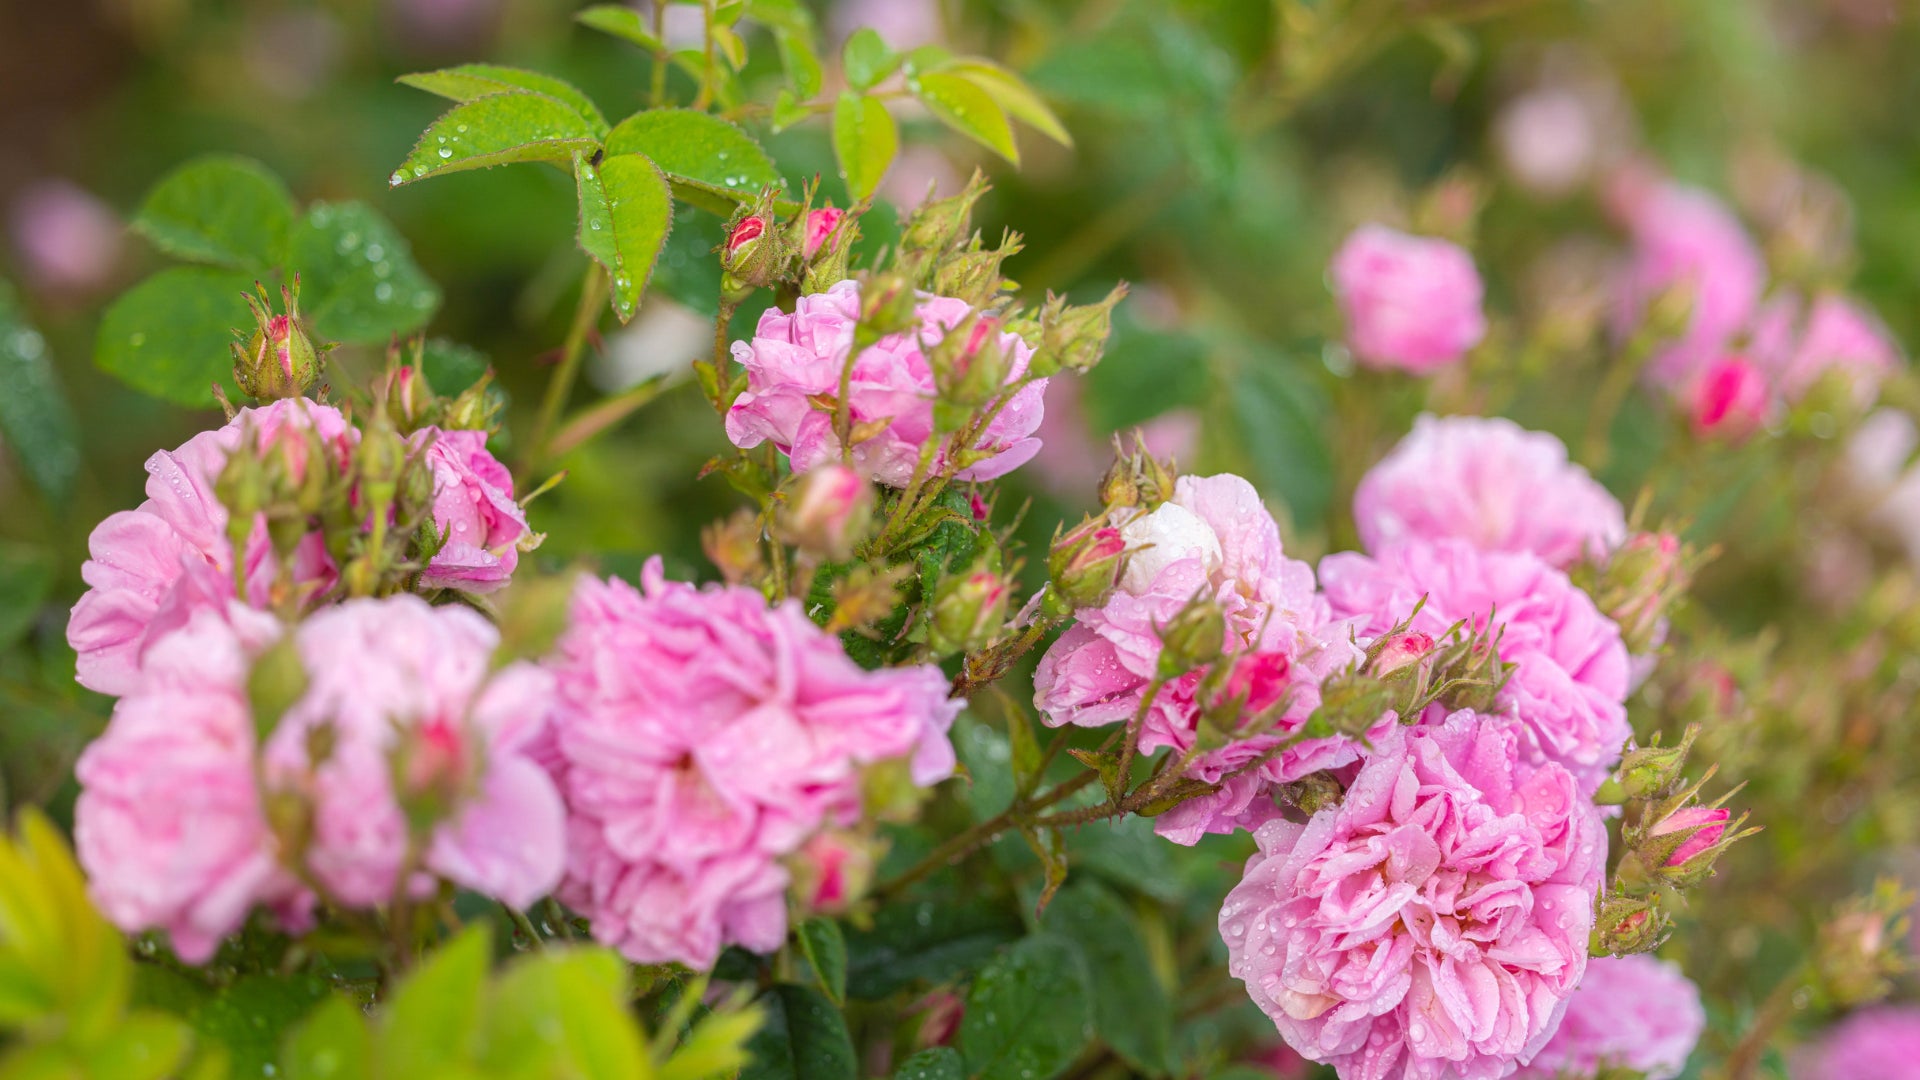 Pink roses in a garden with green leaves, inspired by the beautiful rose fields of Bulgaria, particularly known for exquisite Alteya Bulgarian Rose.